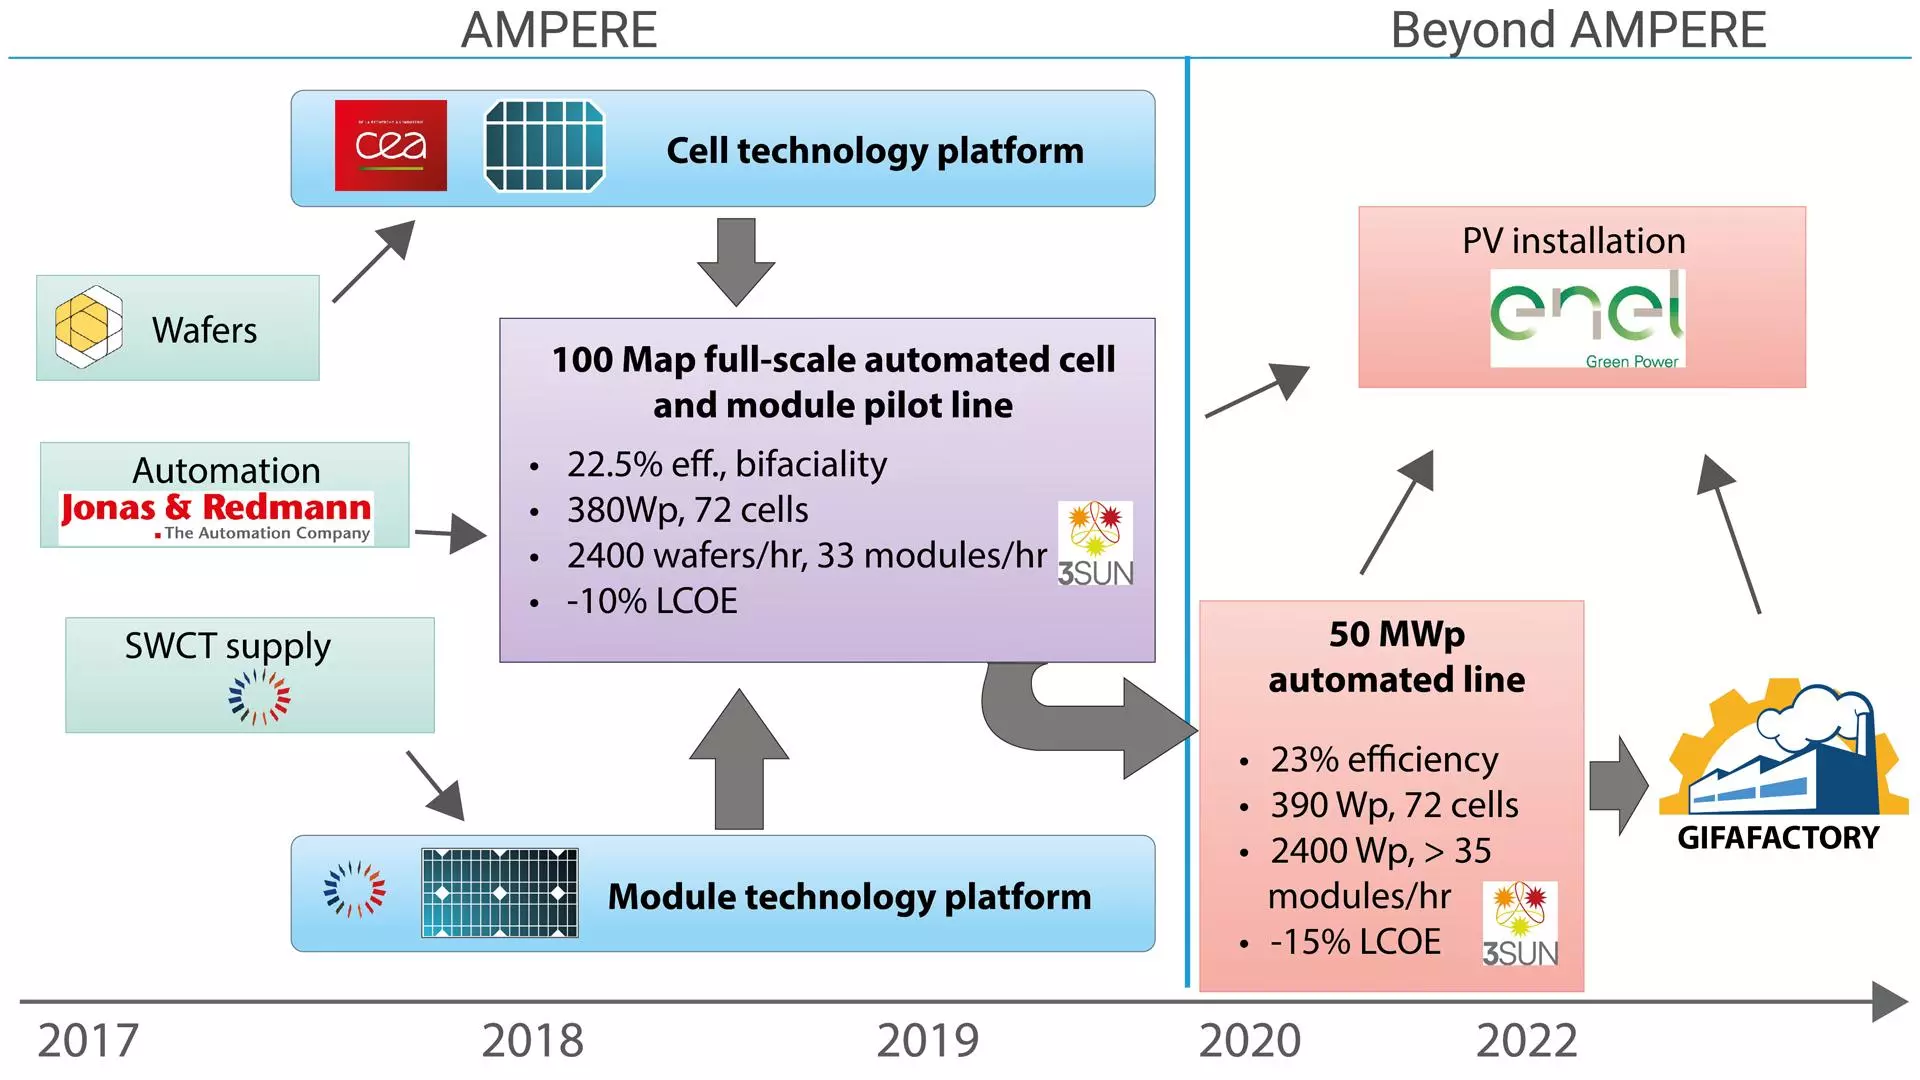 The main objective of AMPERE is the implementation of a 100 MWp  fully automated pilot line based on silicon heterojunction technology